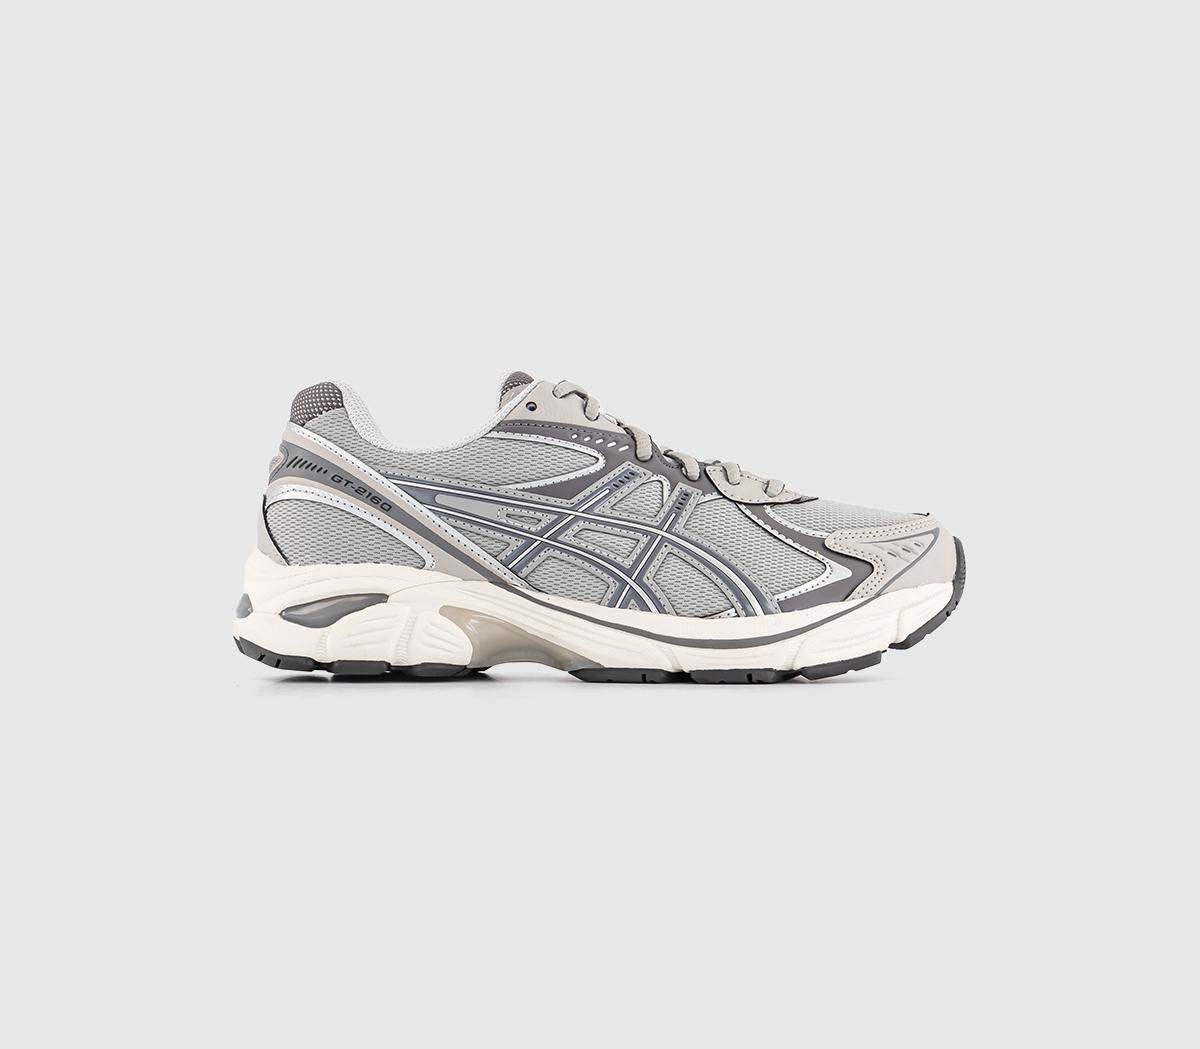 ASICSGt-2160 TrainersOyster Grey Carbon